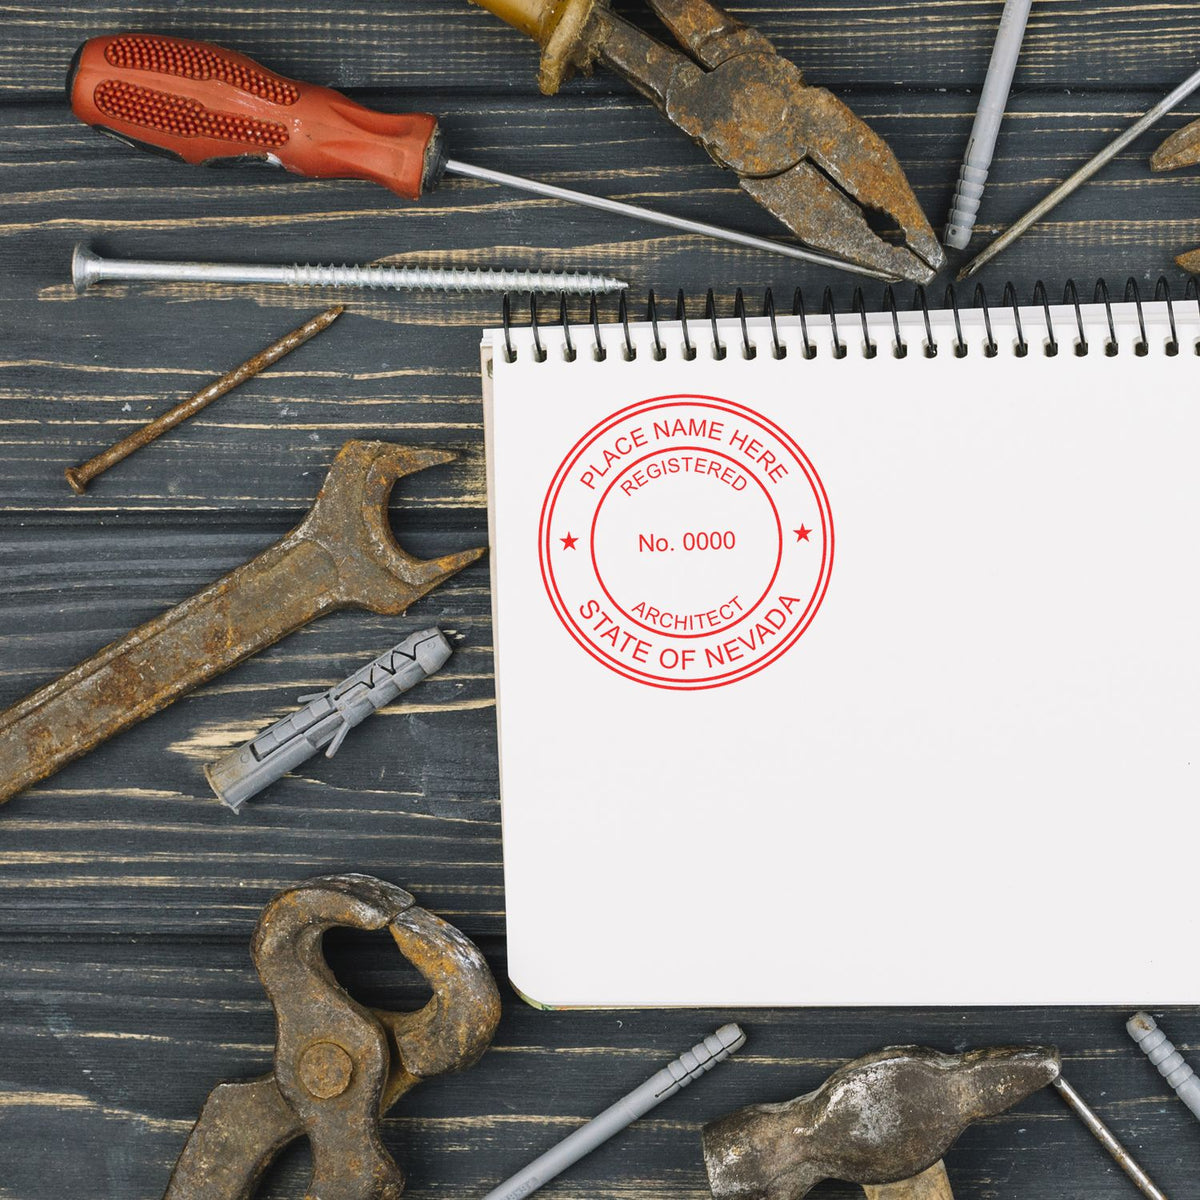 The Slim Pre-Inked Nevada Architect Seal Stamp stamp impression comes to life with a crisp, detailed photo on paper - showcasing true professional quality.